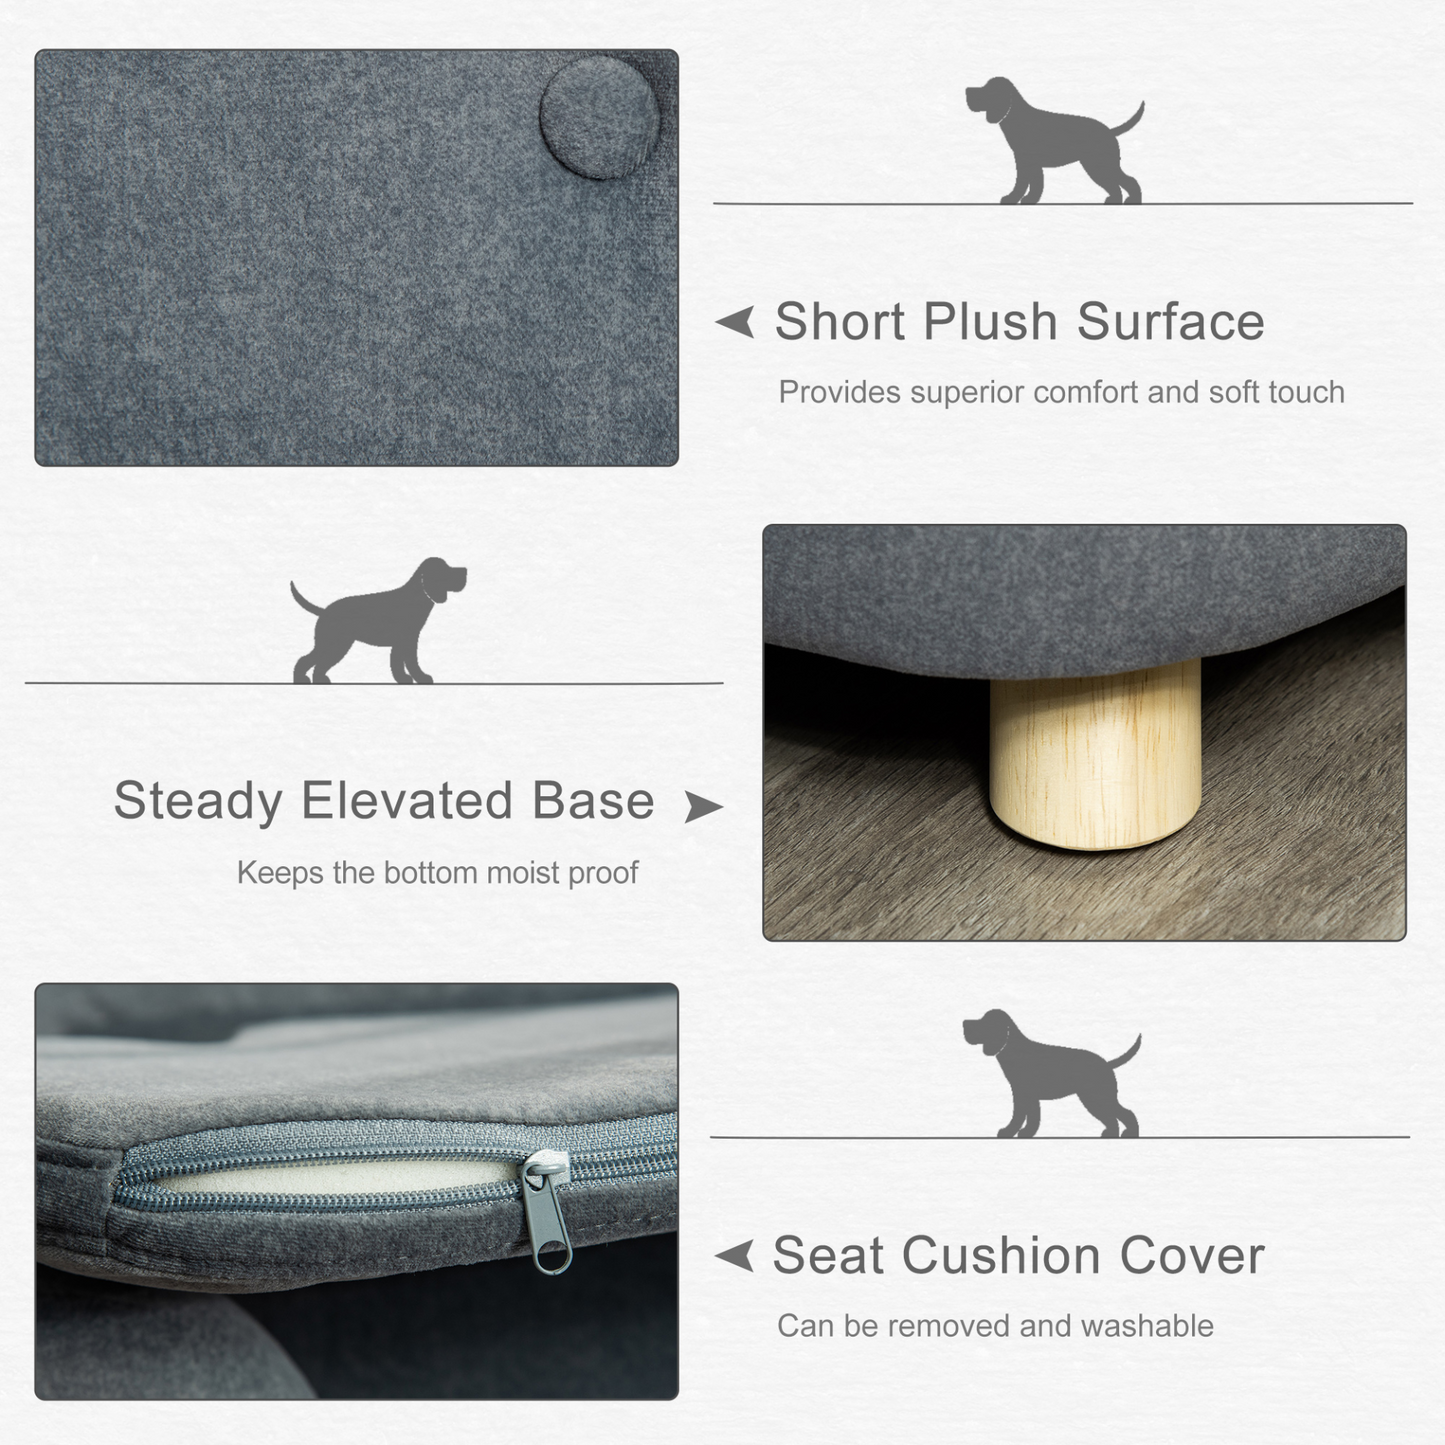 PawHut Dog Sofa Bed Pet Chair Couch with Water Resistant Fabric, Kitten Lounge with Soft Cushion Washable Cover, Wooden Frame for Mini Size Dogs - Grey